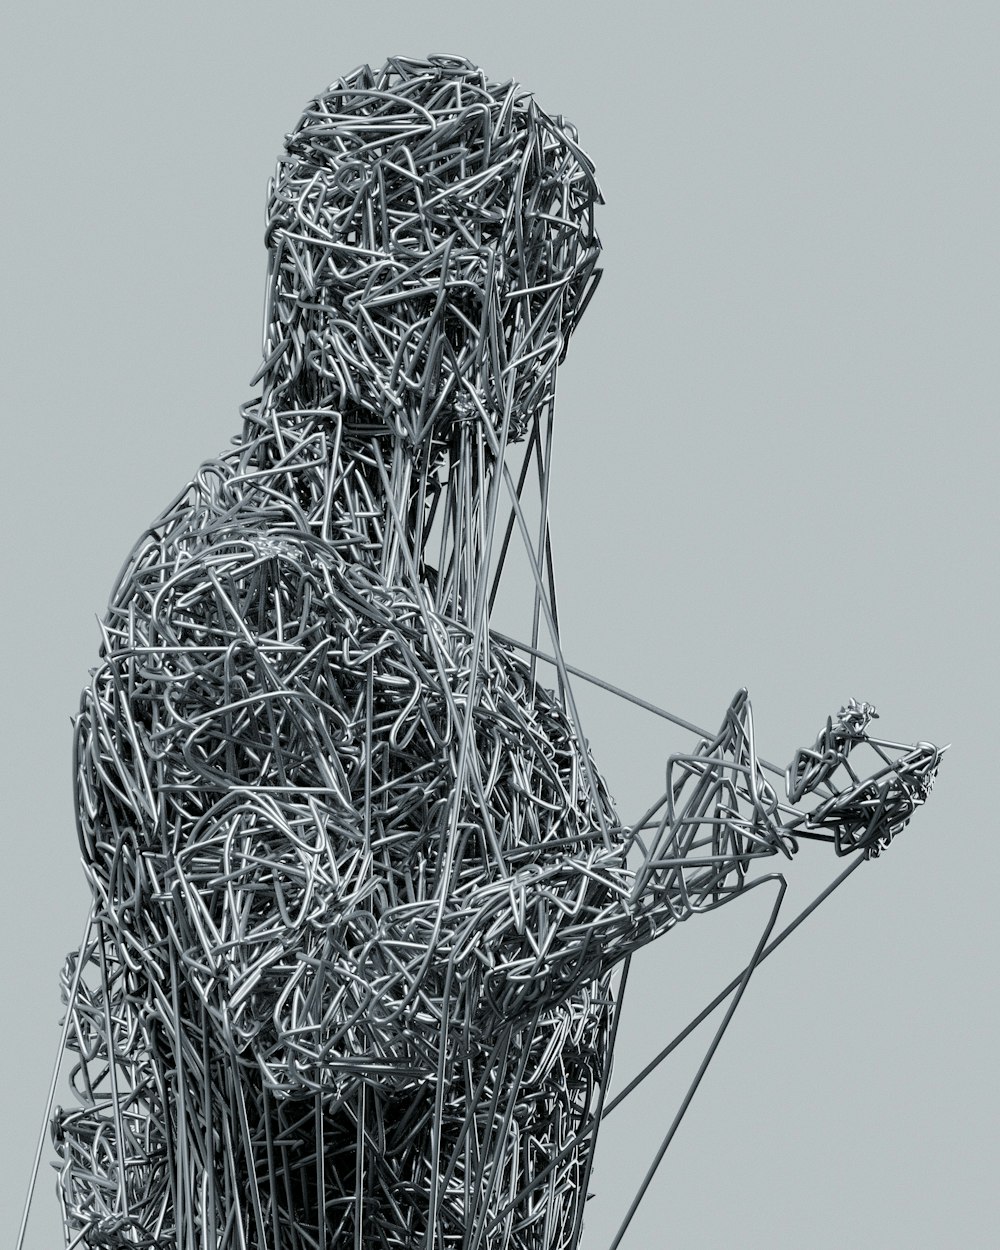 a sculpture of a man holding a cell phone